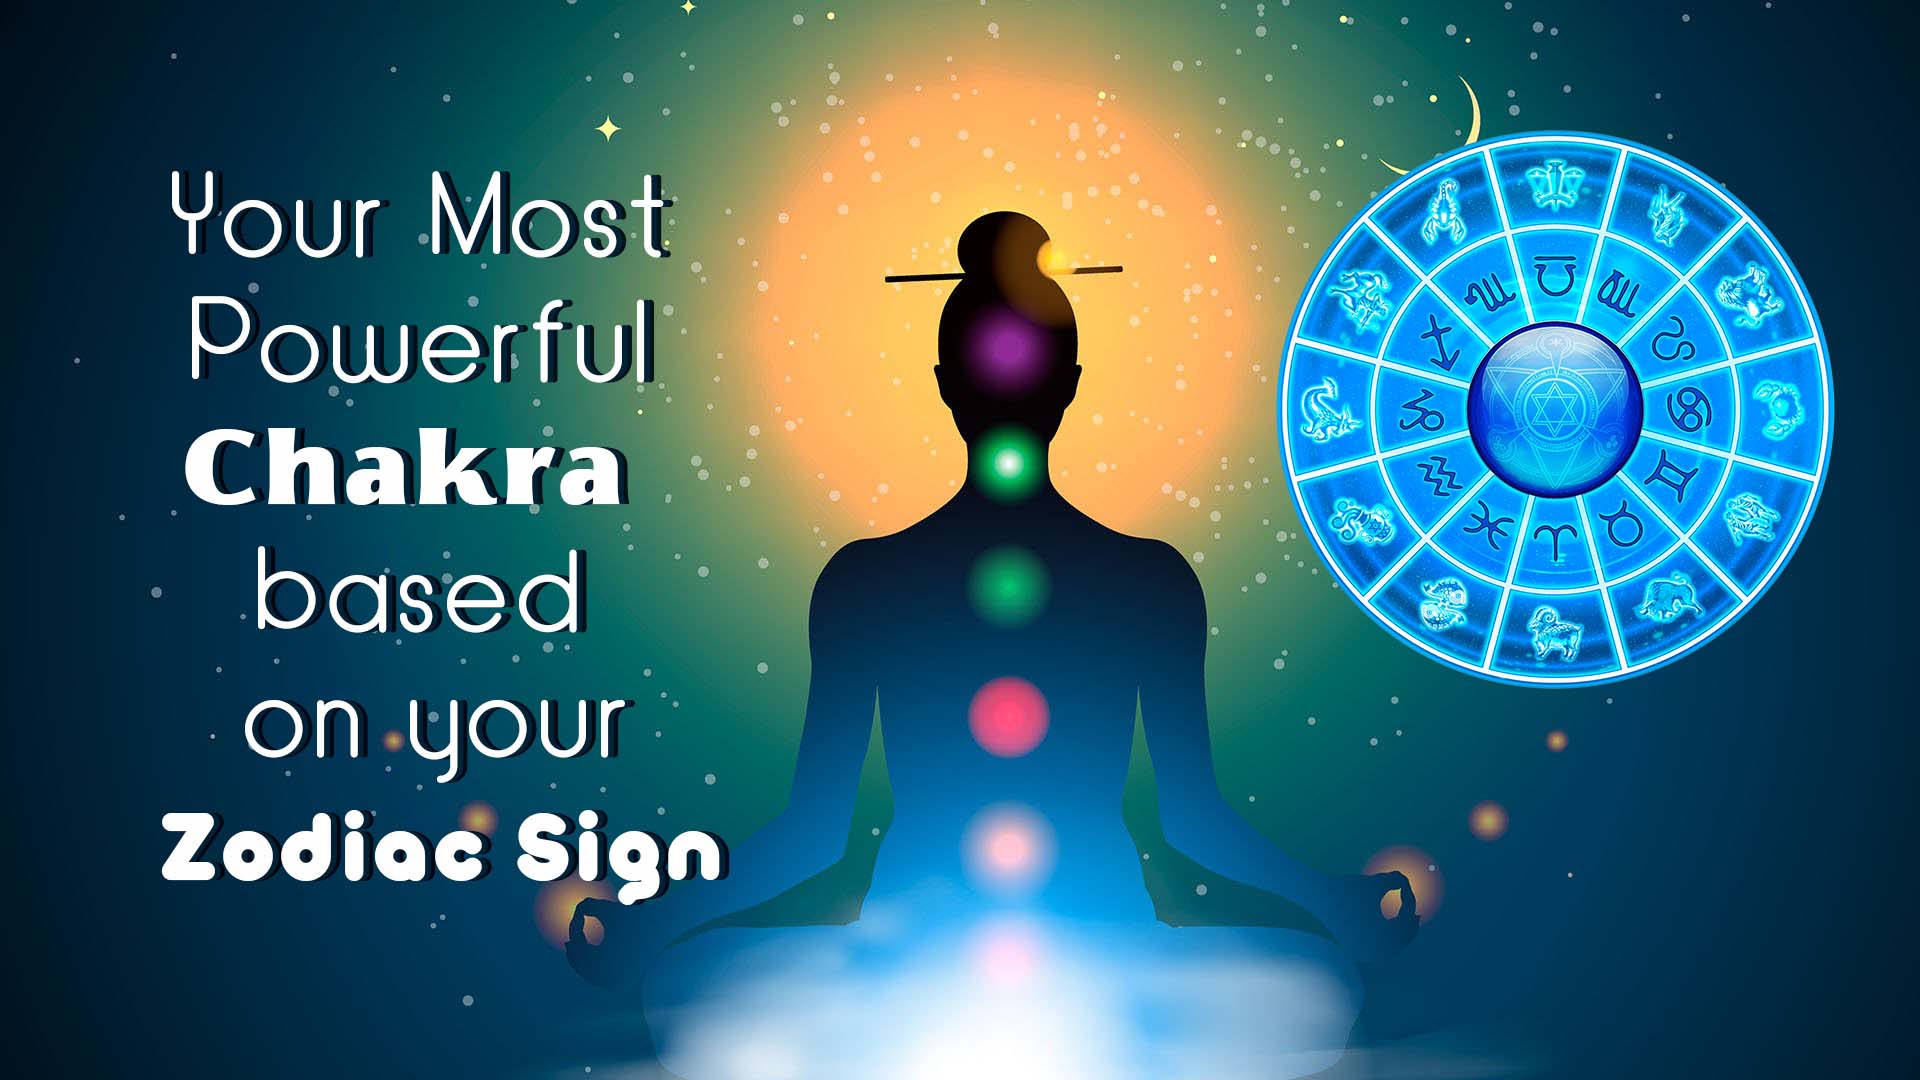 Your-Most-Powerful-Chakra-based-on-your-Zodiac-Sign.jpg